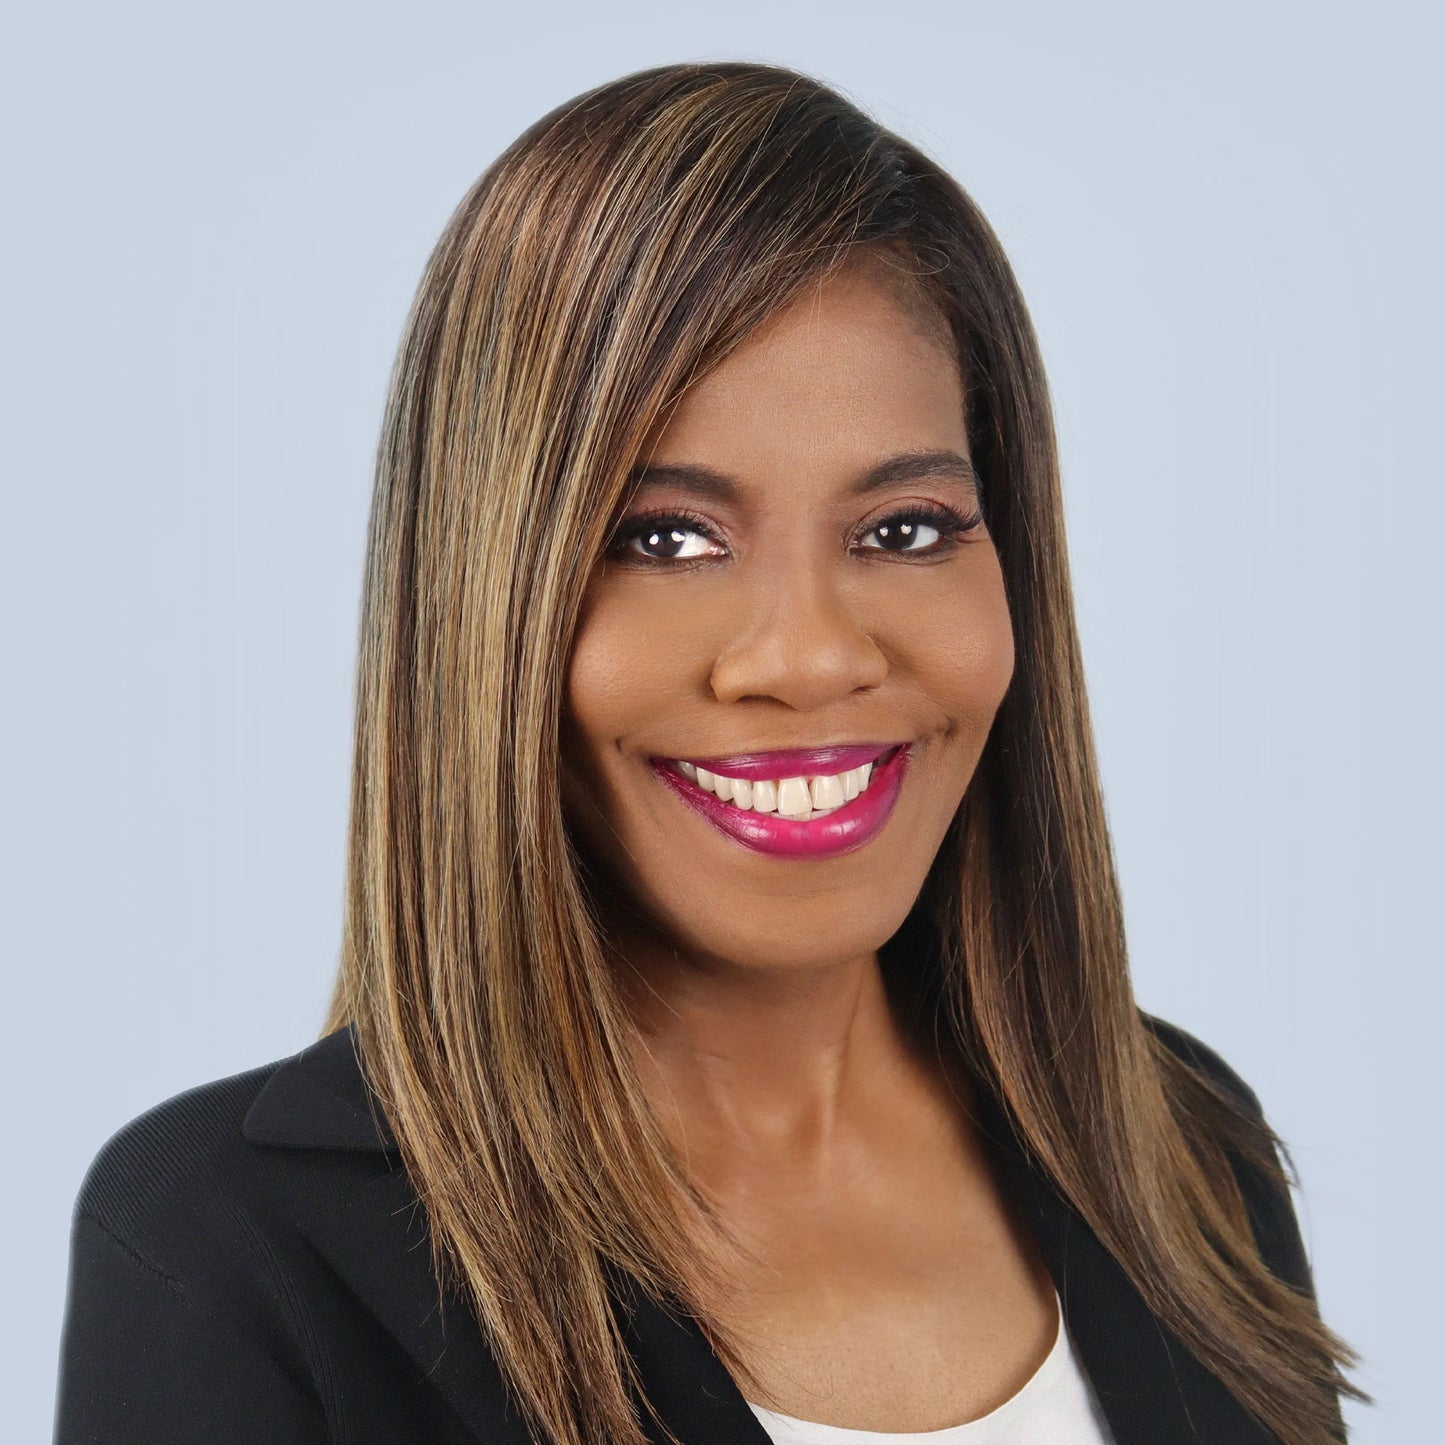 eMed CEO Dr. Patrice Harris Receives Two Awards - eMed Digital Healthcare